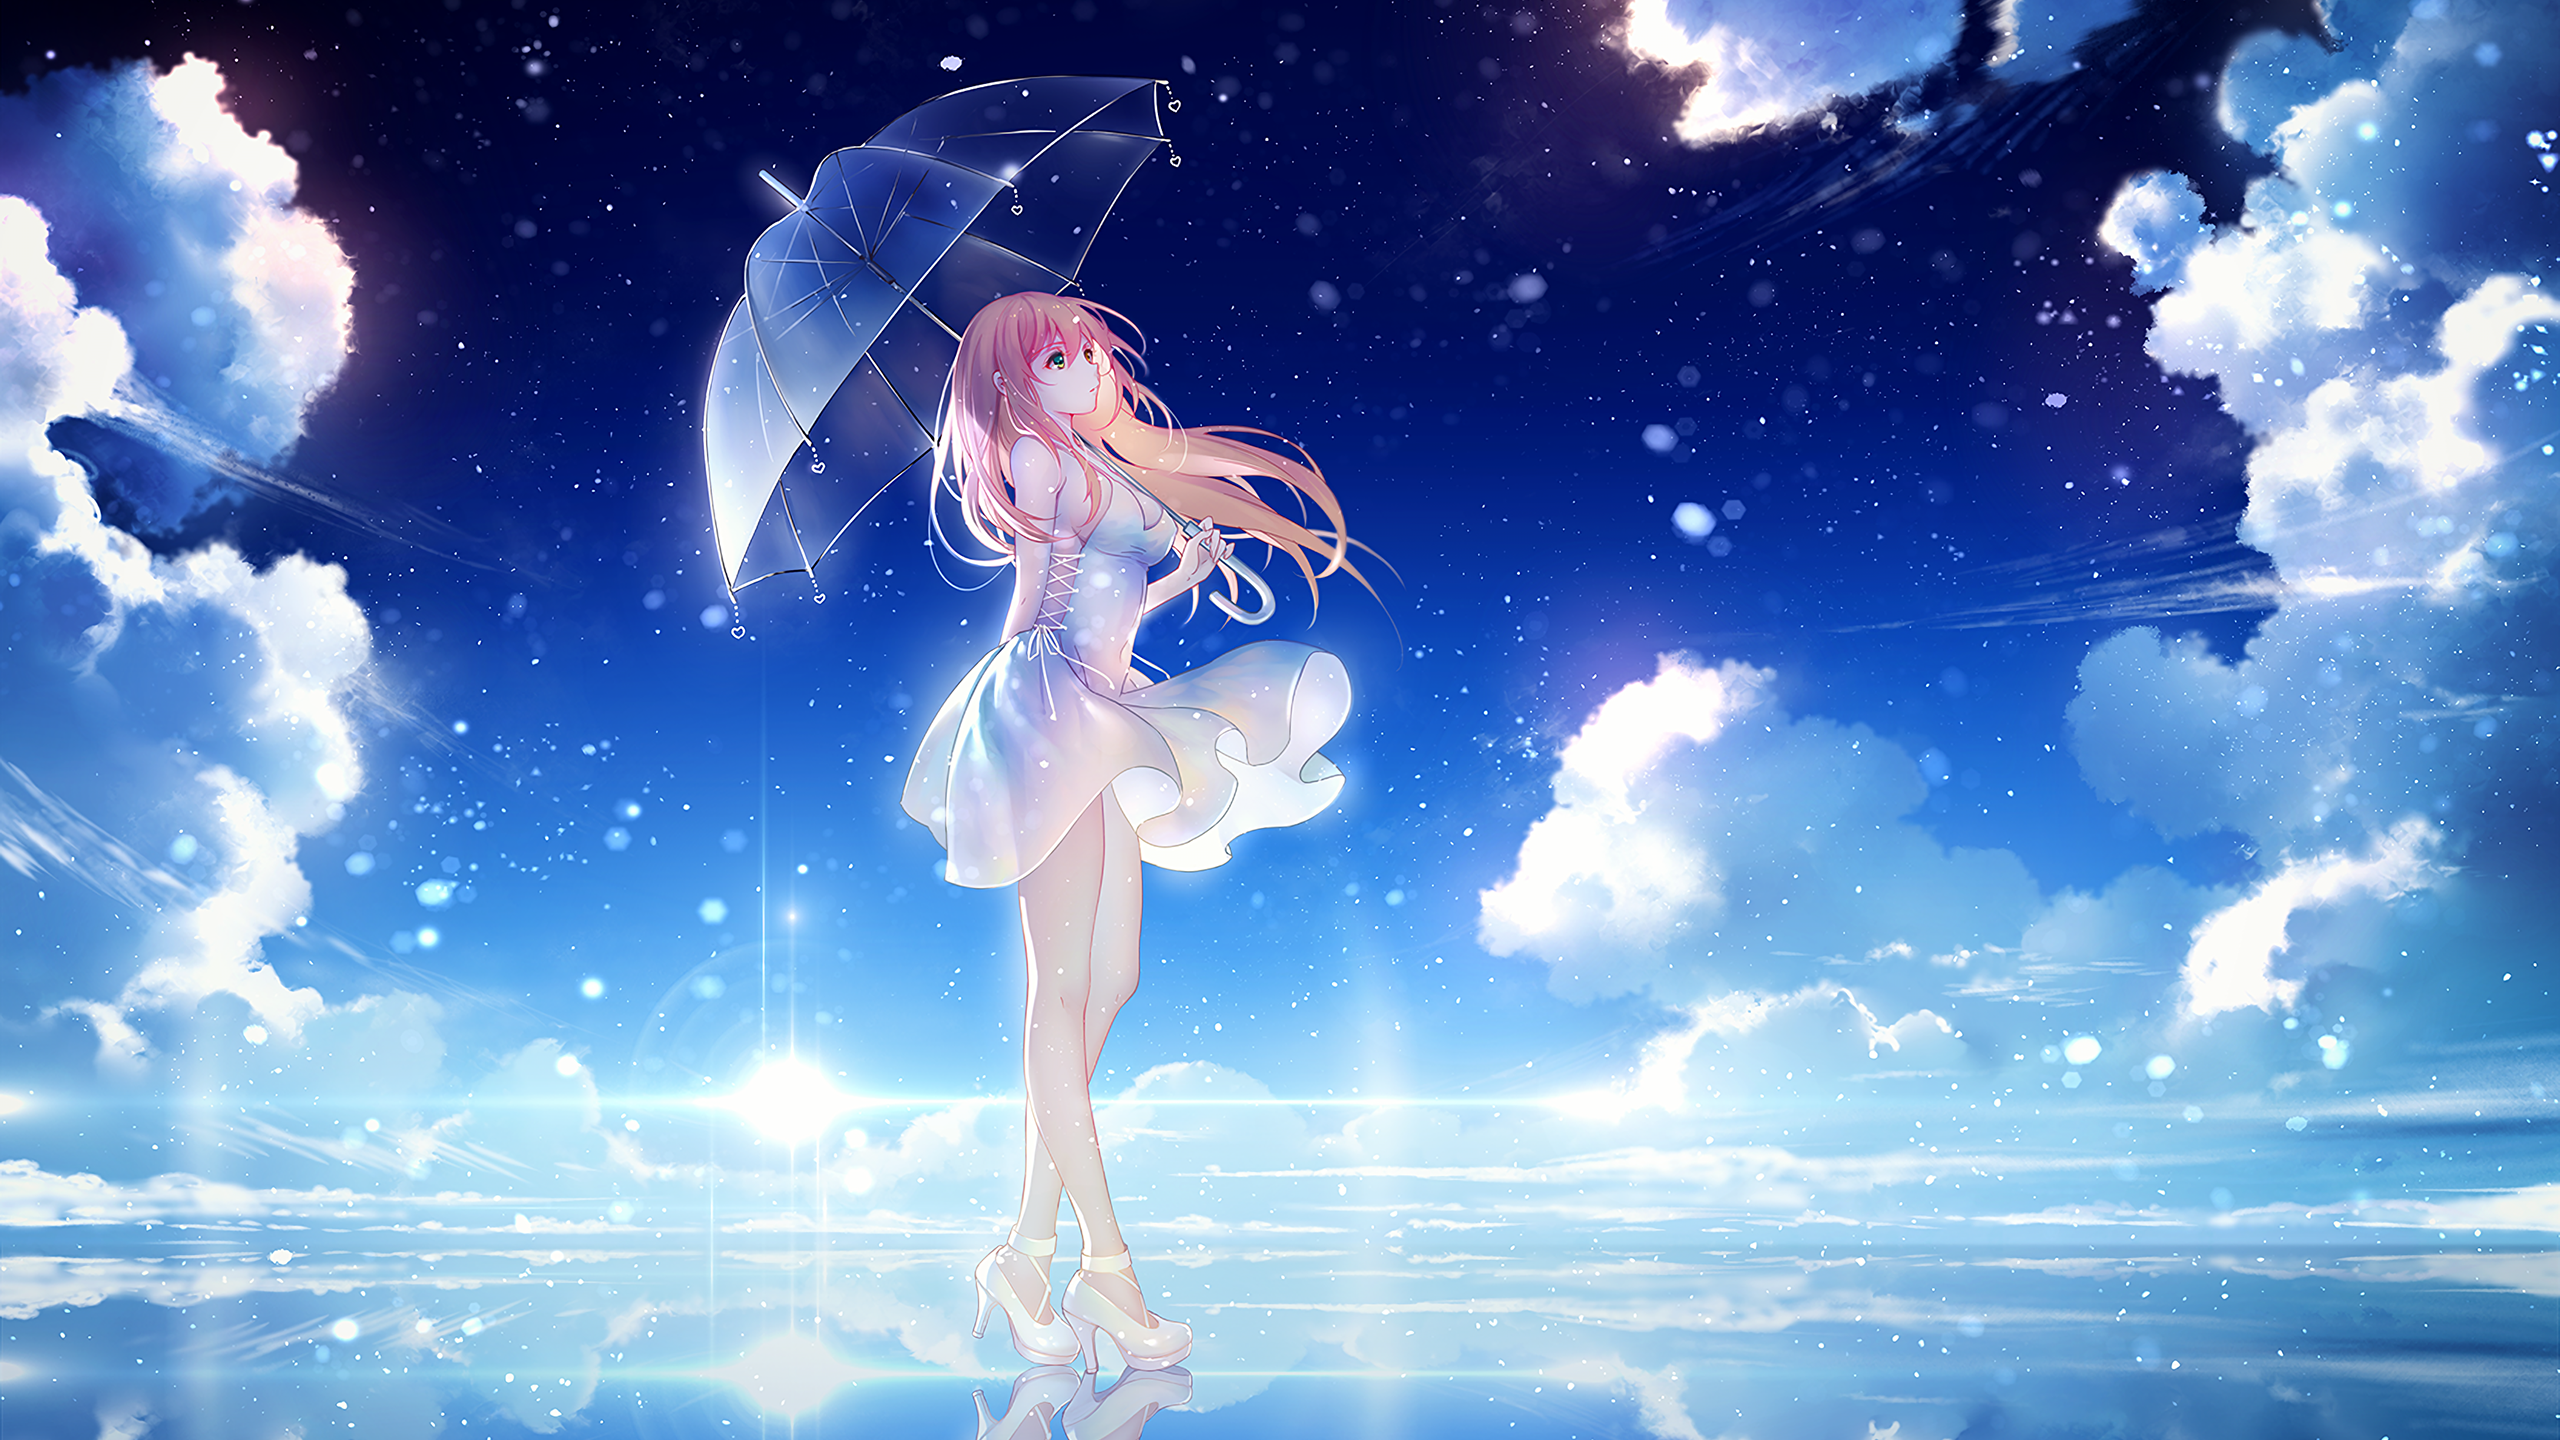 Download Bright Anime Girl Sky Looking Wallpaper | Wallpapers.com